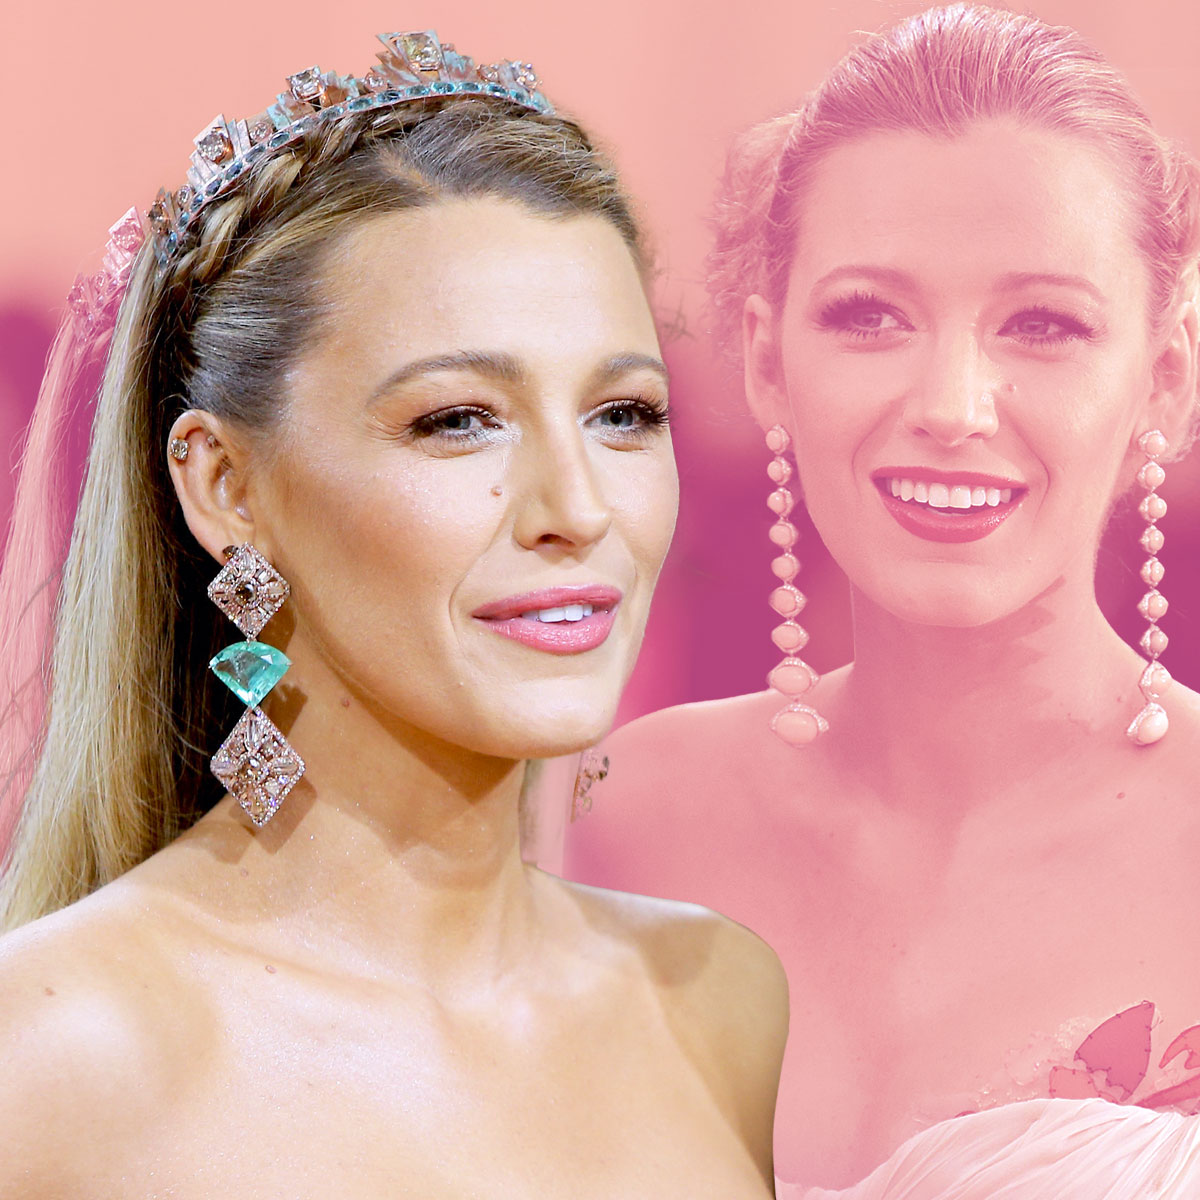 Get Blake Lively's Leather Look in This $27 Dress